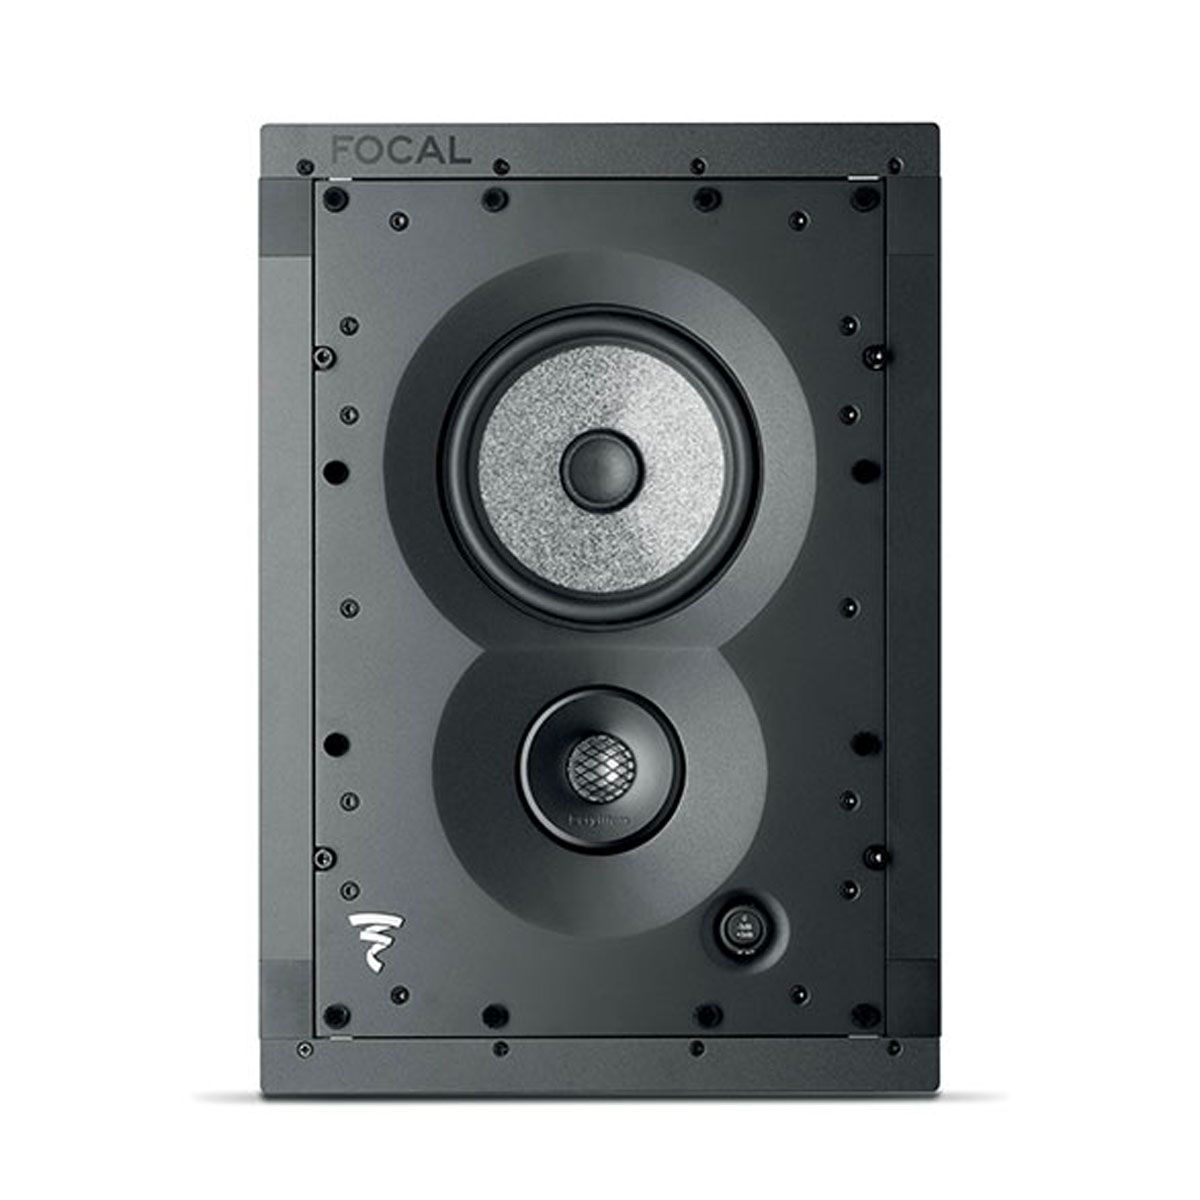 Focal 1000 IW6 In-Wall Loudspeaker front view 